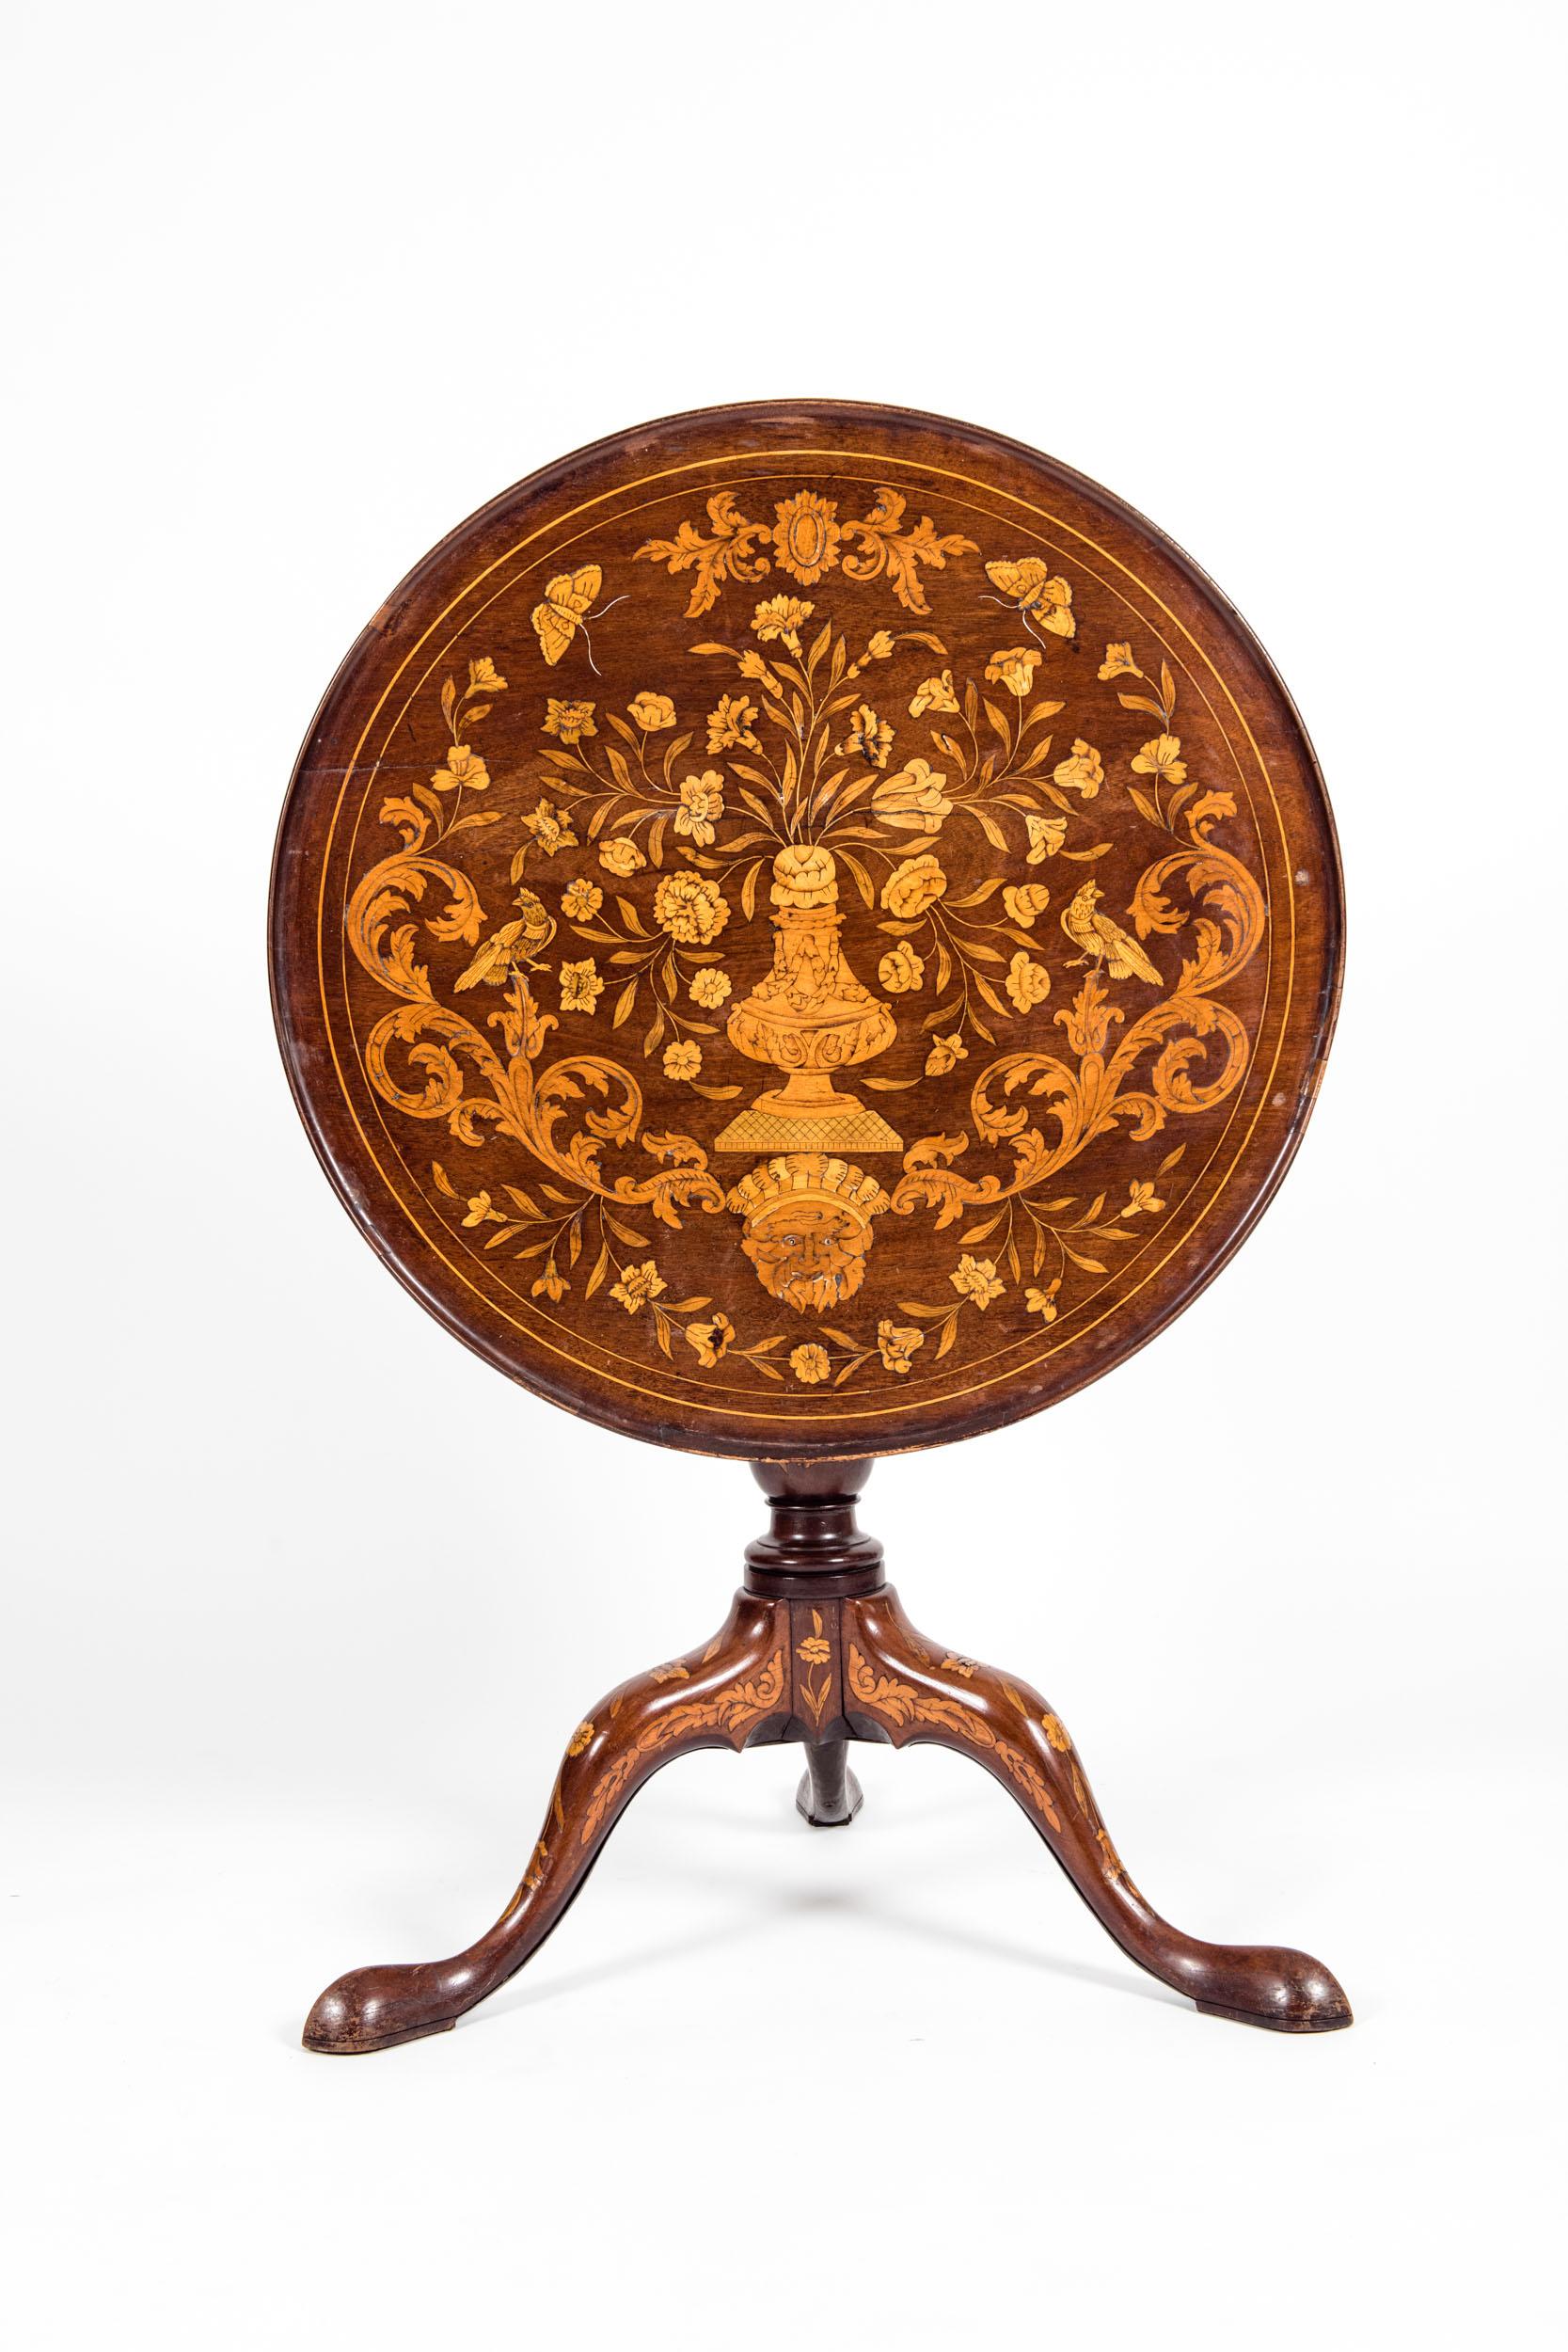 A very fine 19th century Dutch Marquetry inlaid round tilt-top table. The marquetry tilt-top is in good antique condition . Minor wear consistent with age / use . Minor structural instability , The holding socket under the table needs to be change .